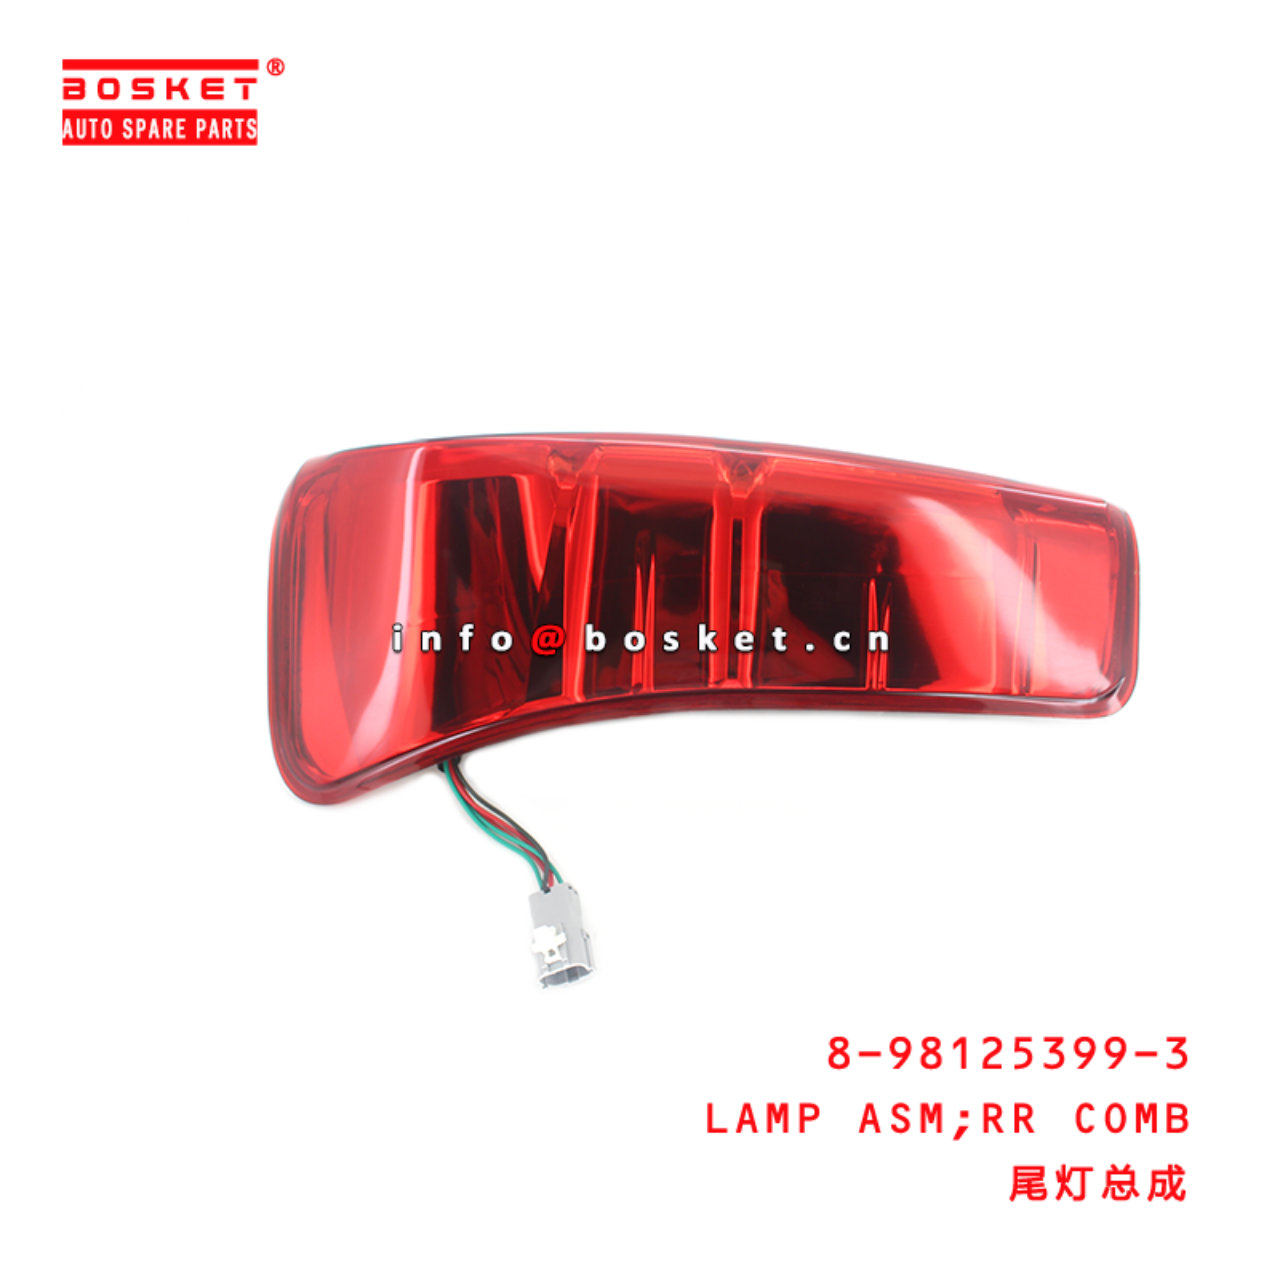 8-98125399-3 Rear Combination Lamp Assembly 8981253993 Suitable for ISUZU D-MAX12